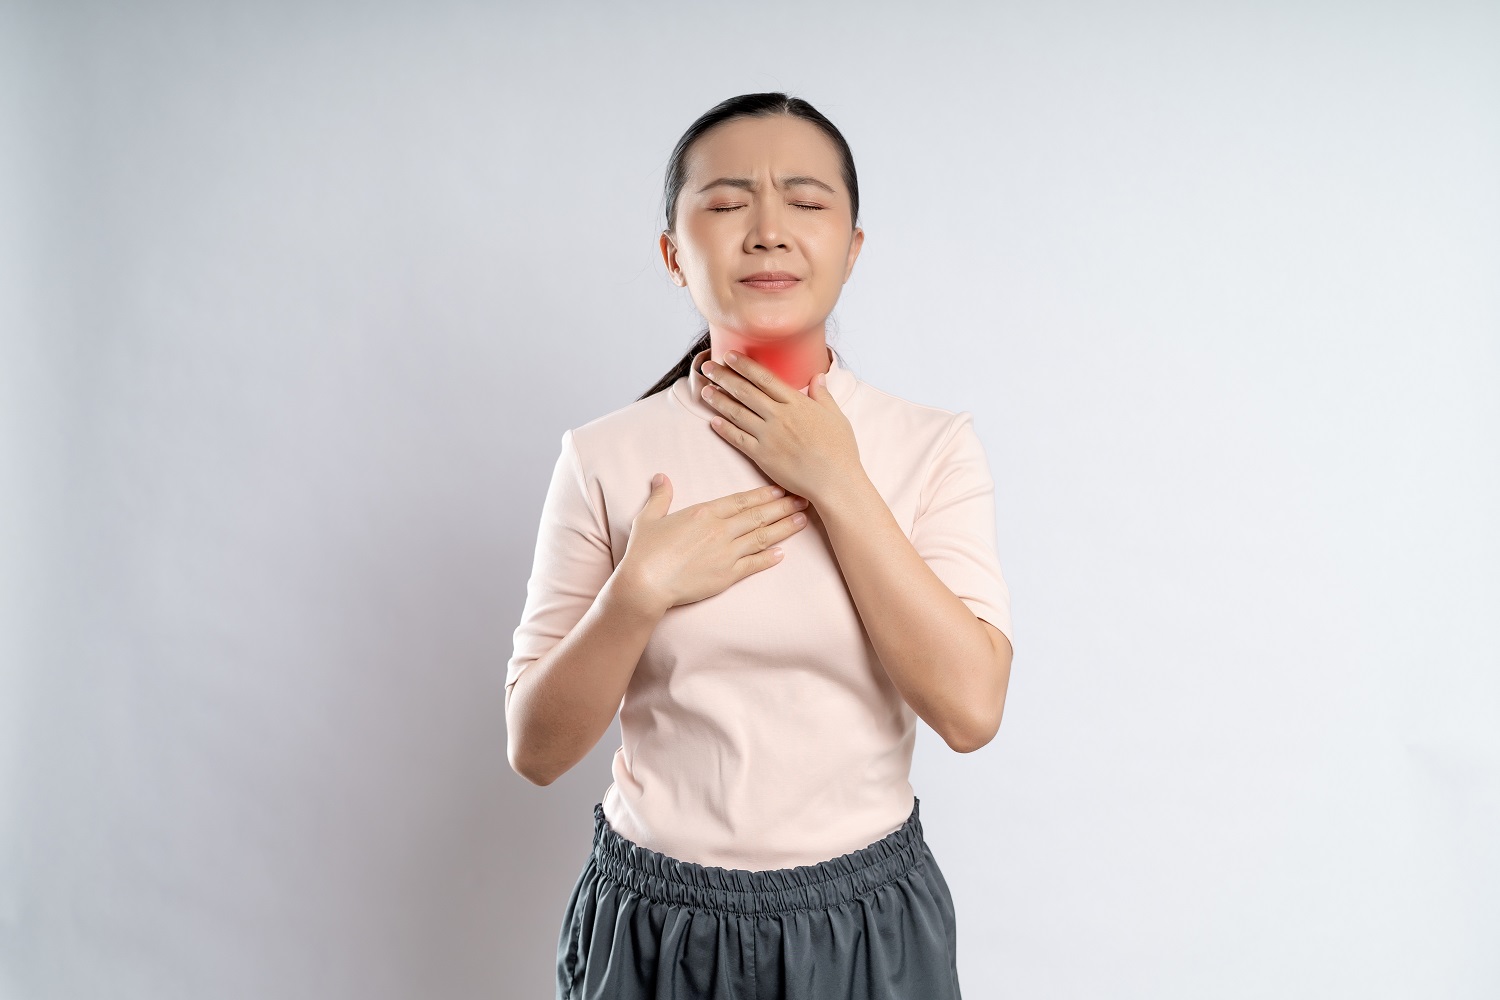 Asian woman was sick with sore throat and touching neck with red